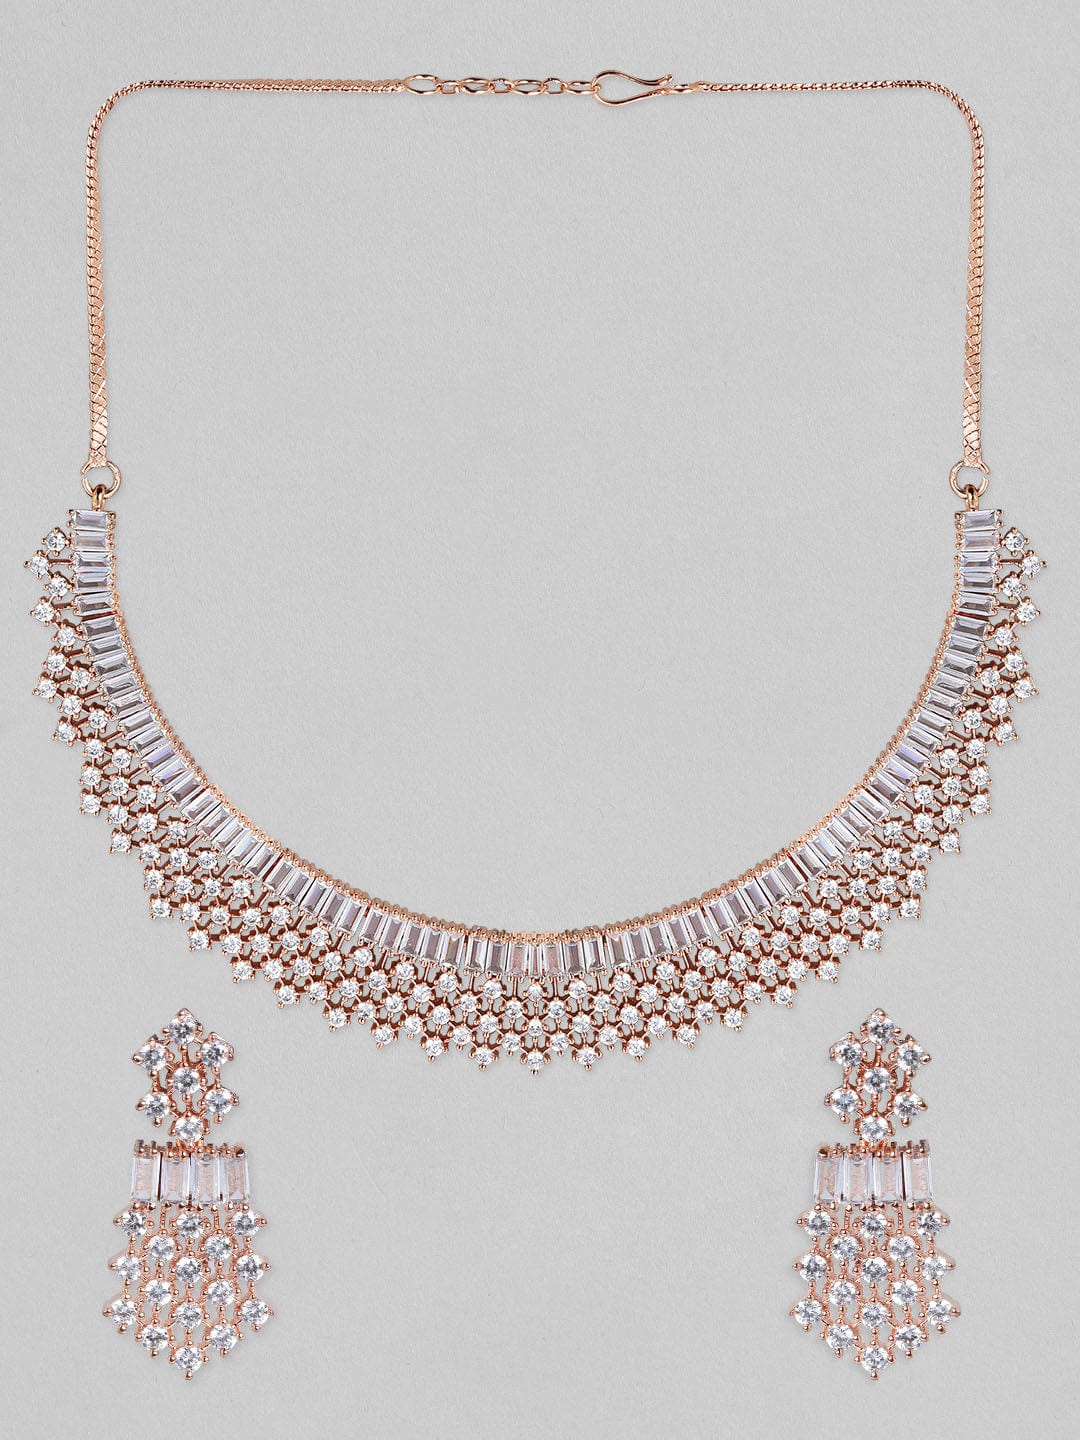 Rubans Rose Gold Plated Handcrafted AD Studded Necklace Set Necklace Set